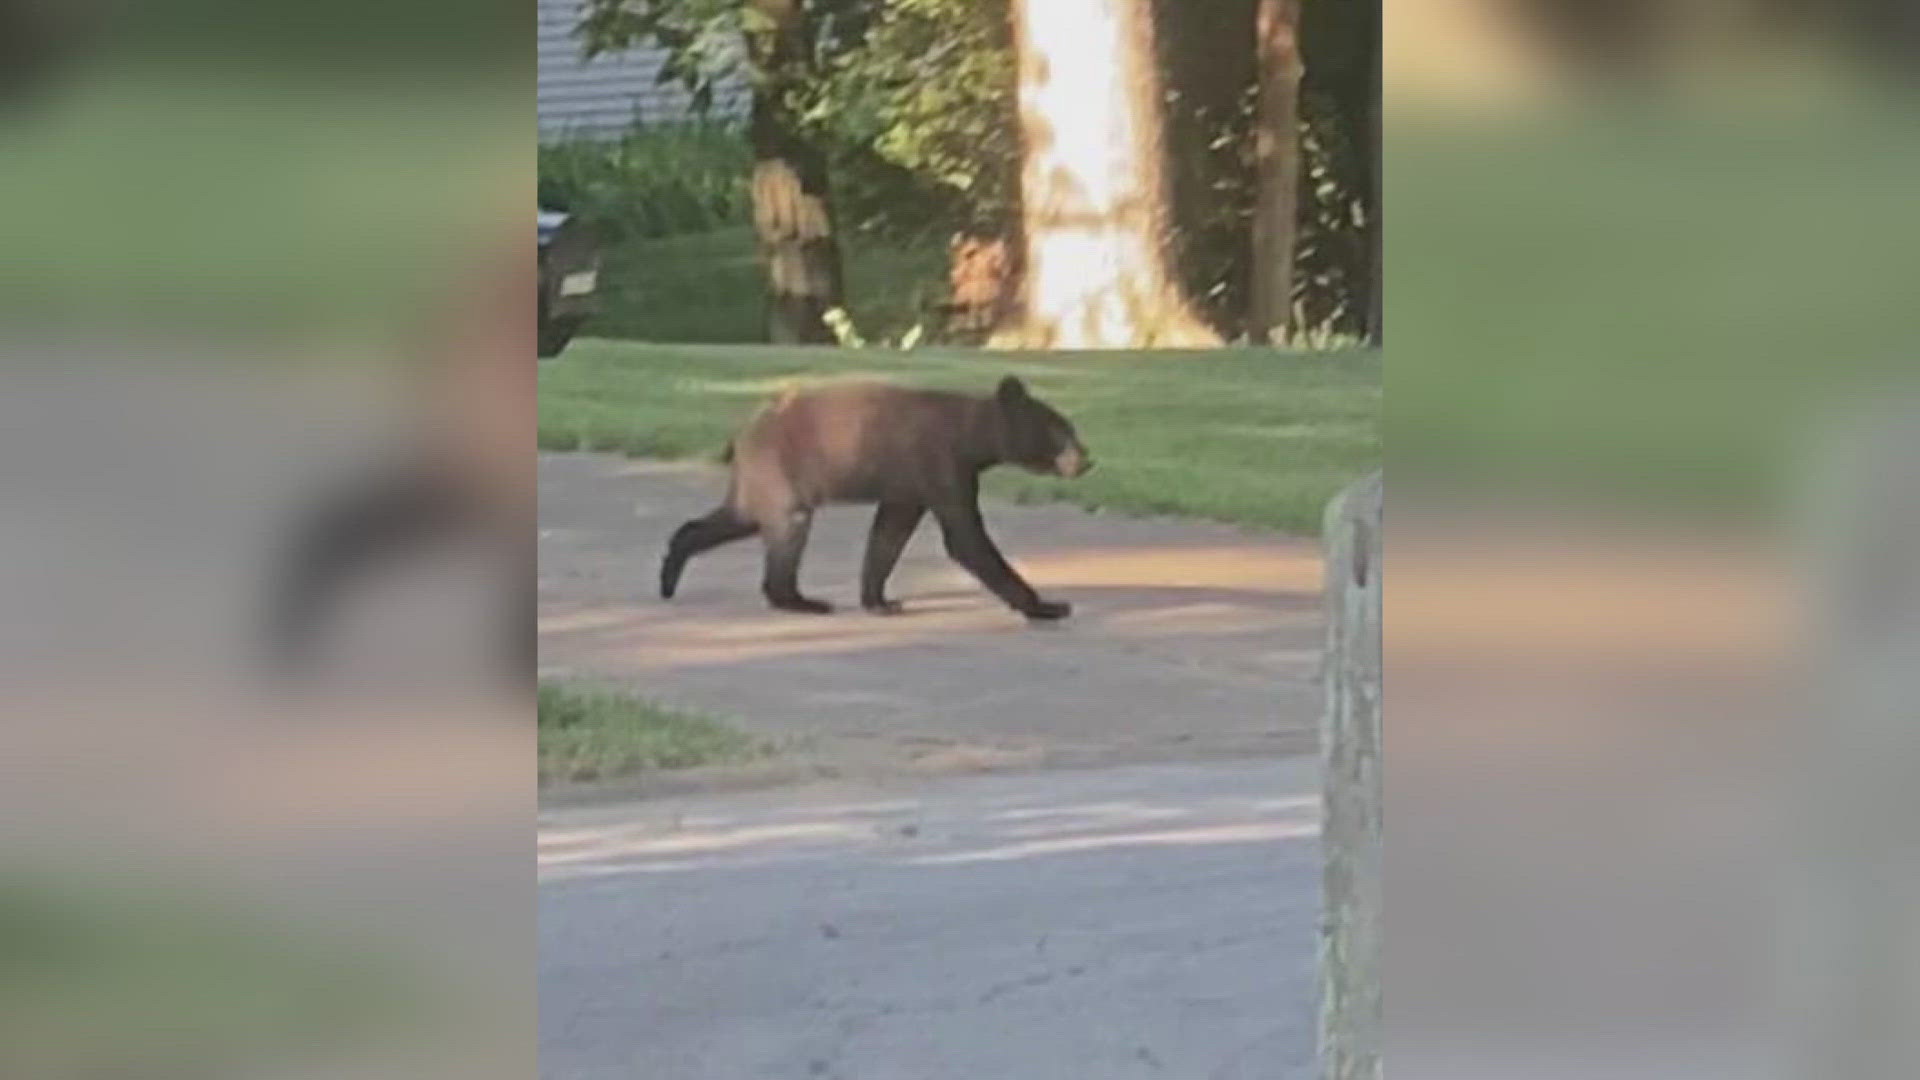 Several people have seen a black bear cub in Ballwin. The Department of Conservation believes this is the same bear seen earlier this week in Eureka.